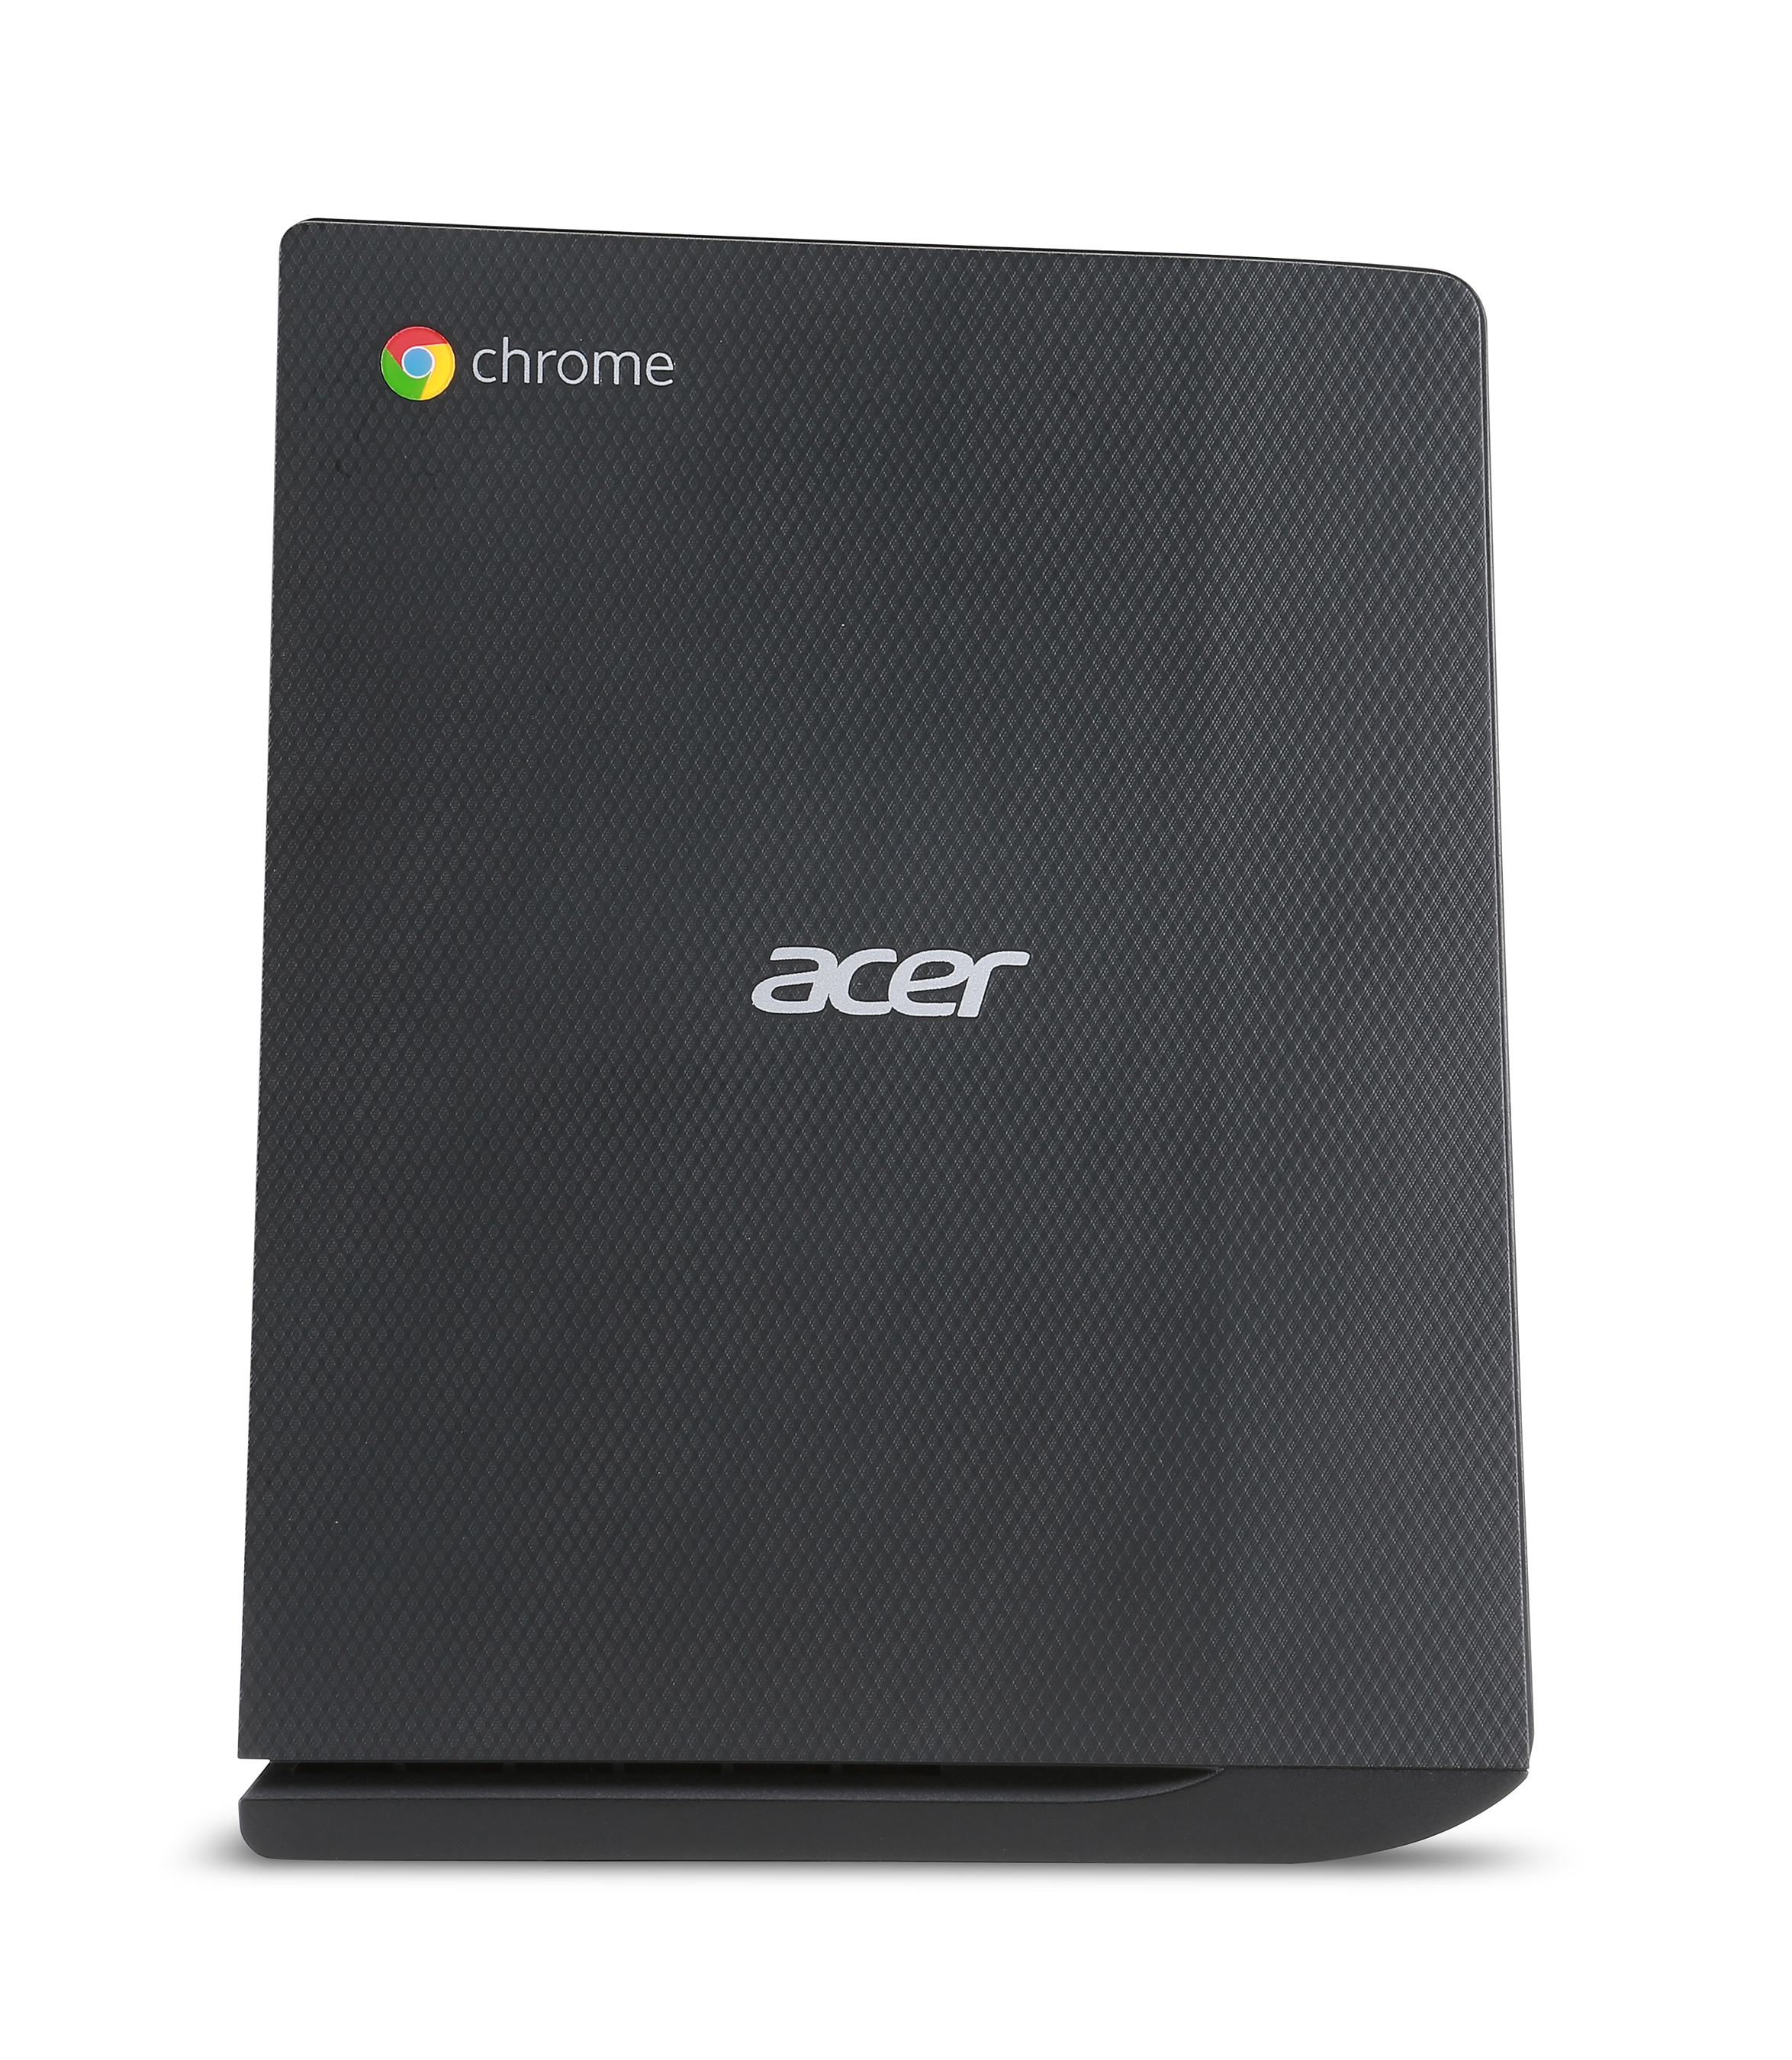 Housed in a compact. .6 liter chassis that stands upright and is VESA mountable, the Acer Chromebox CXI saves space.